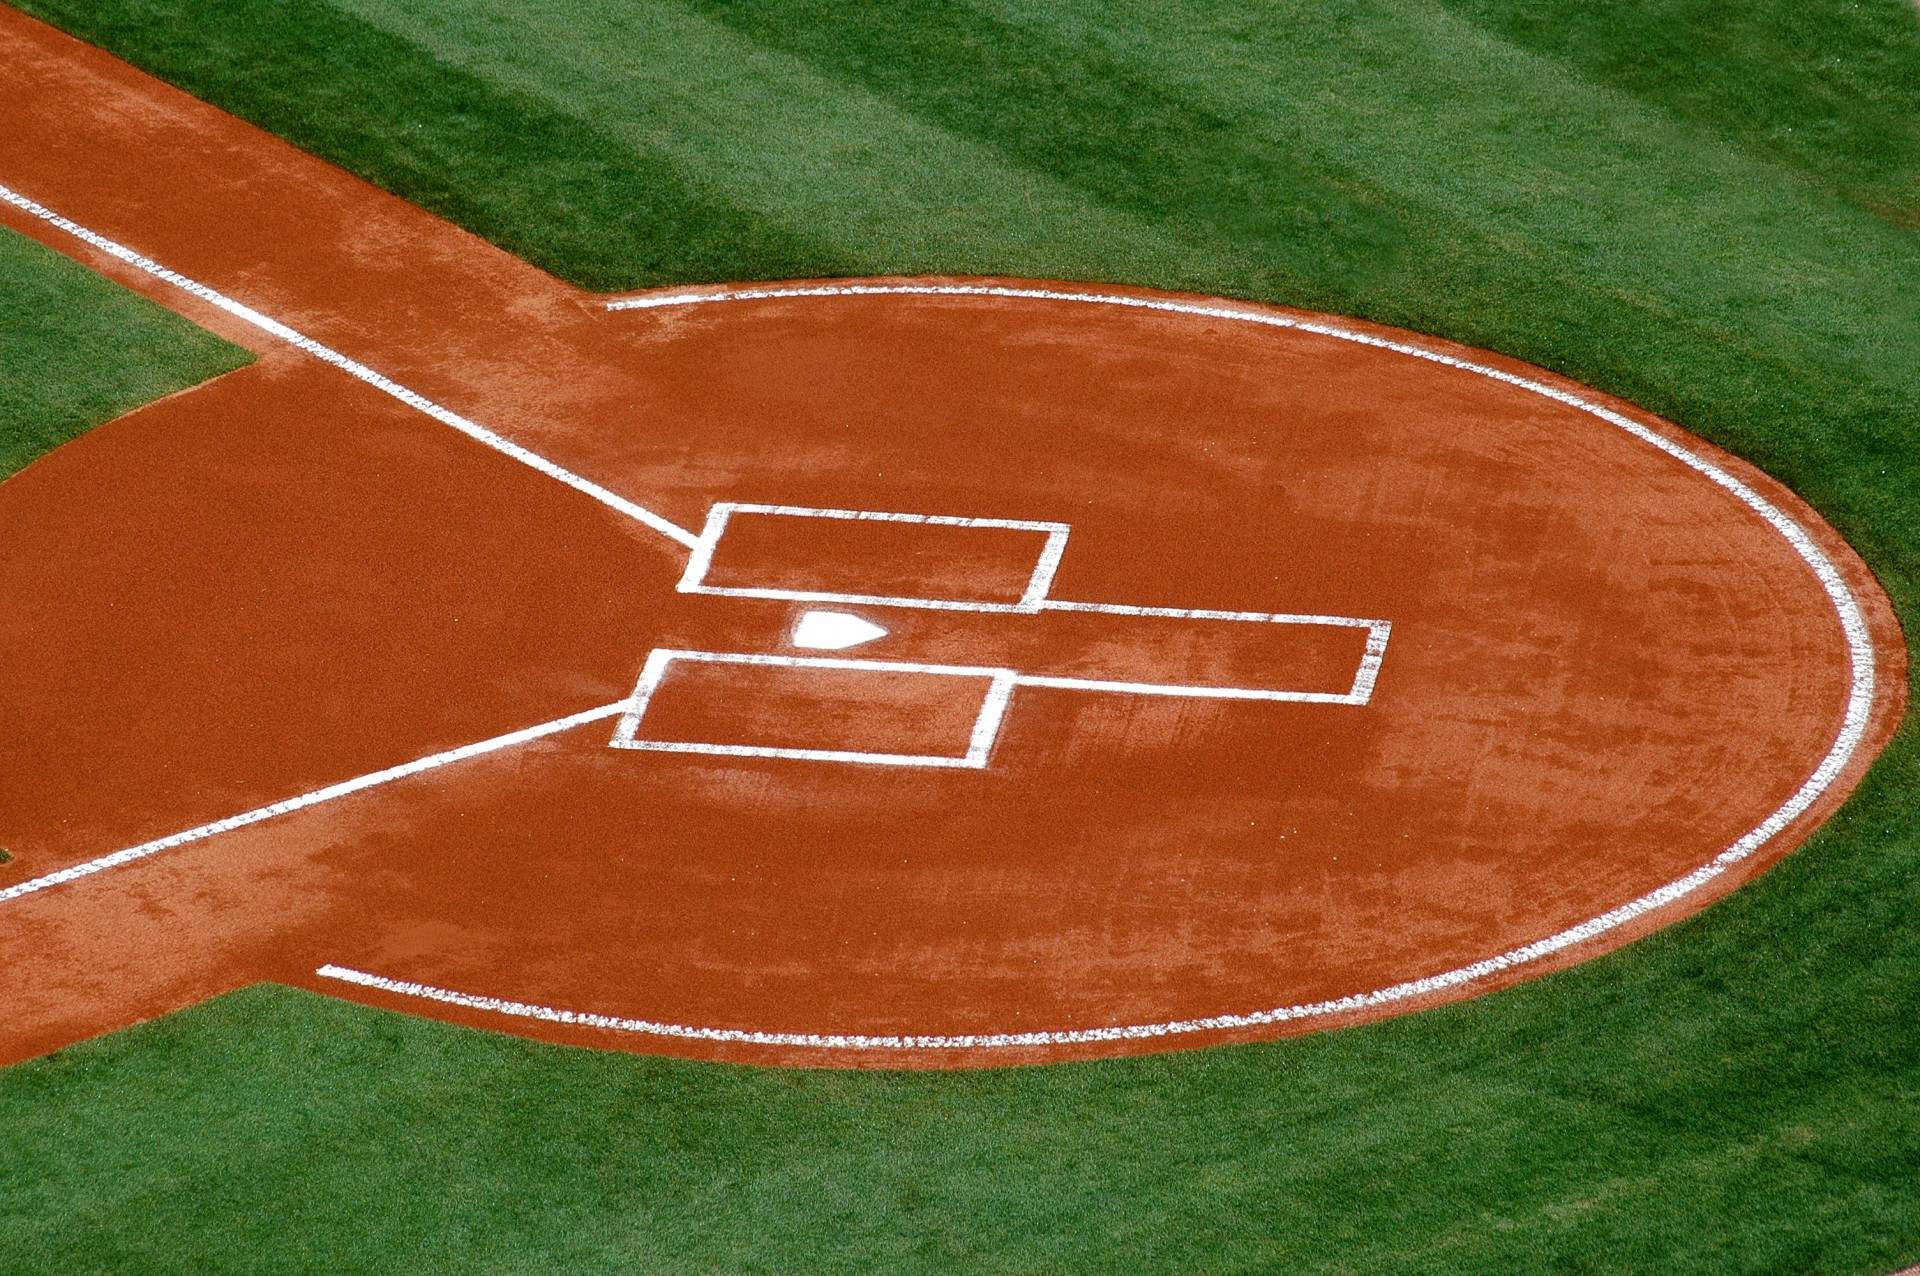 baseball-s-home-plate-free-stock-photo-public-domain-pictures